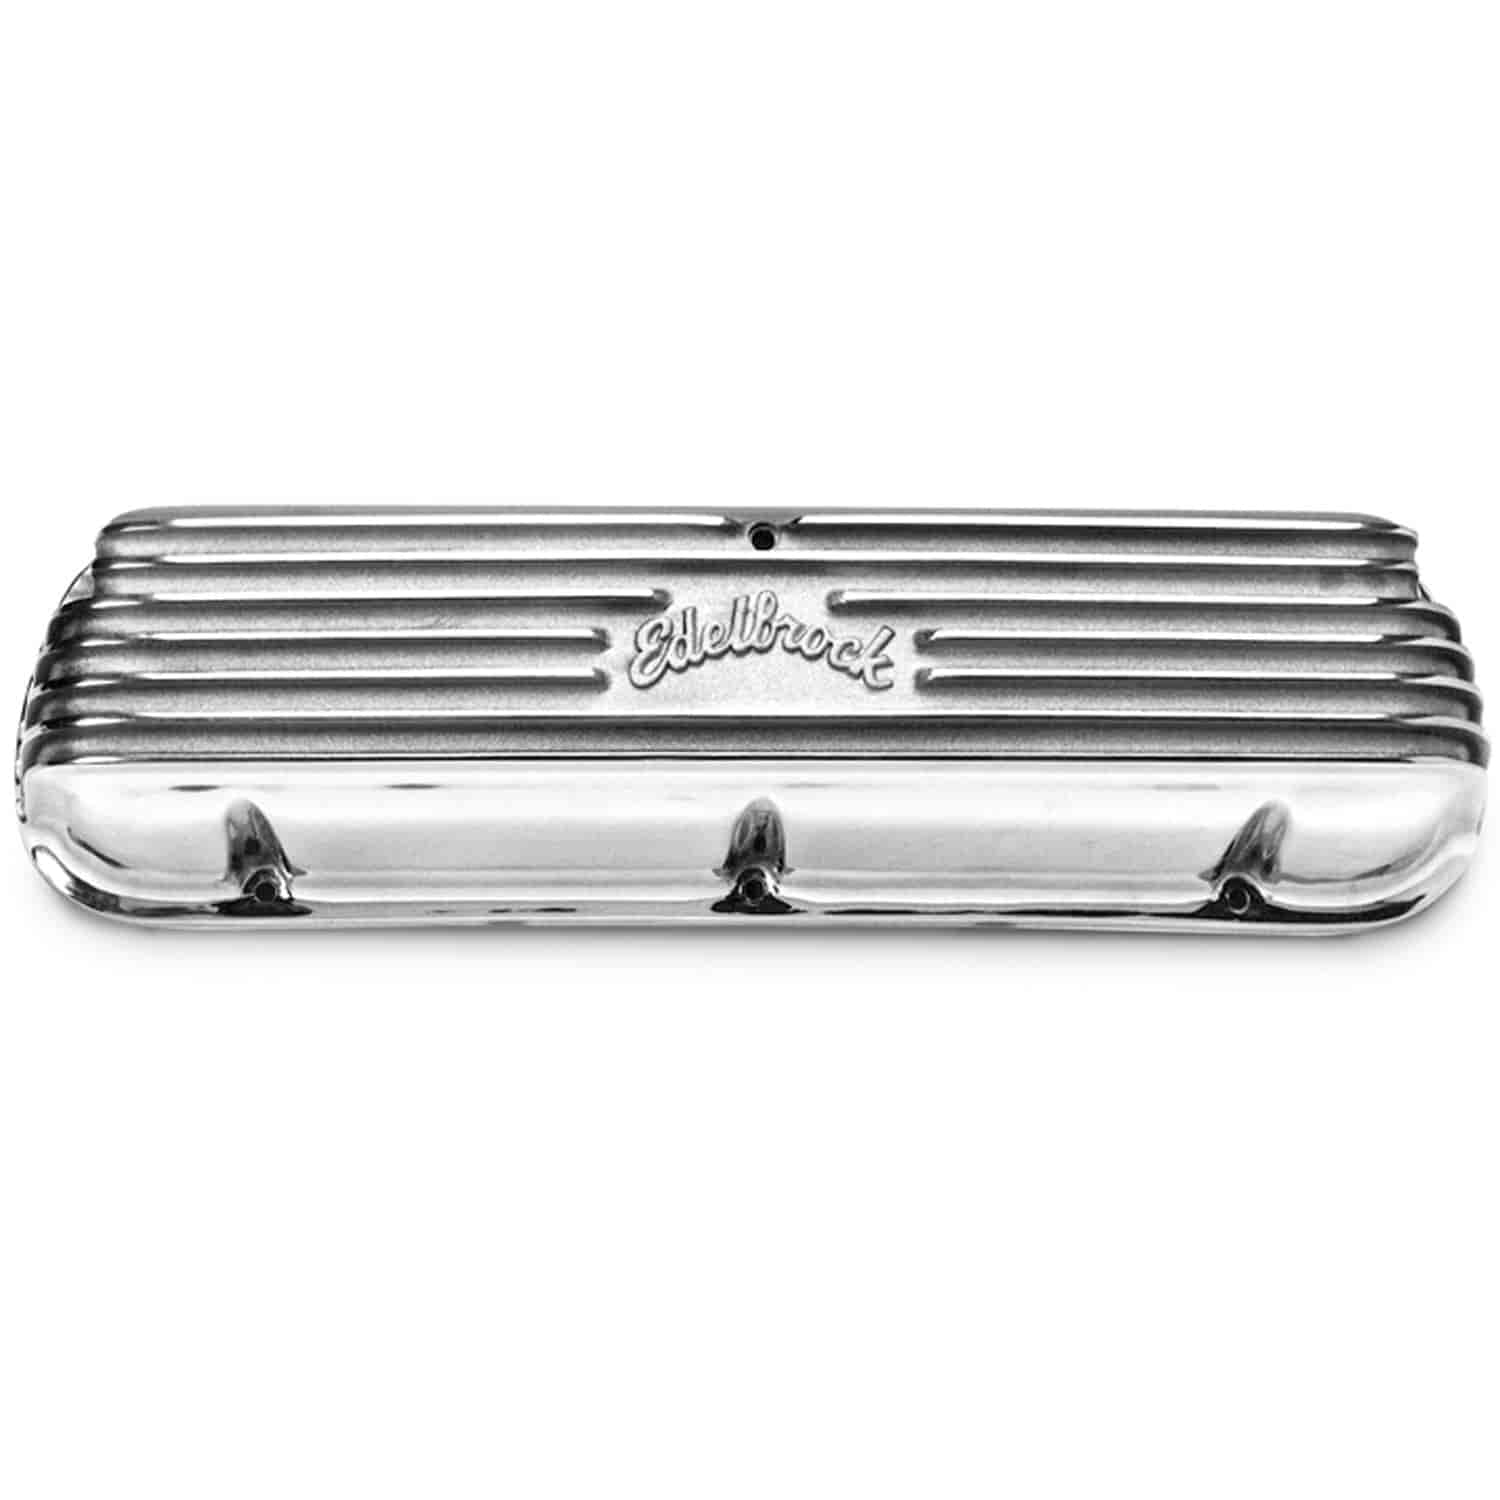 Edelbrock 4160: Classic Finned Valve Covers for 1962-1595 Small Block Ford  221-351W with Polished Finish JEGS